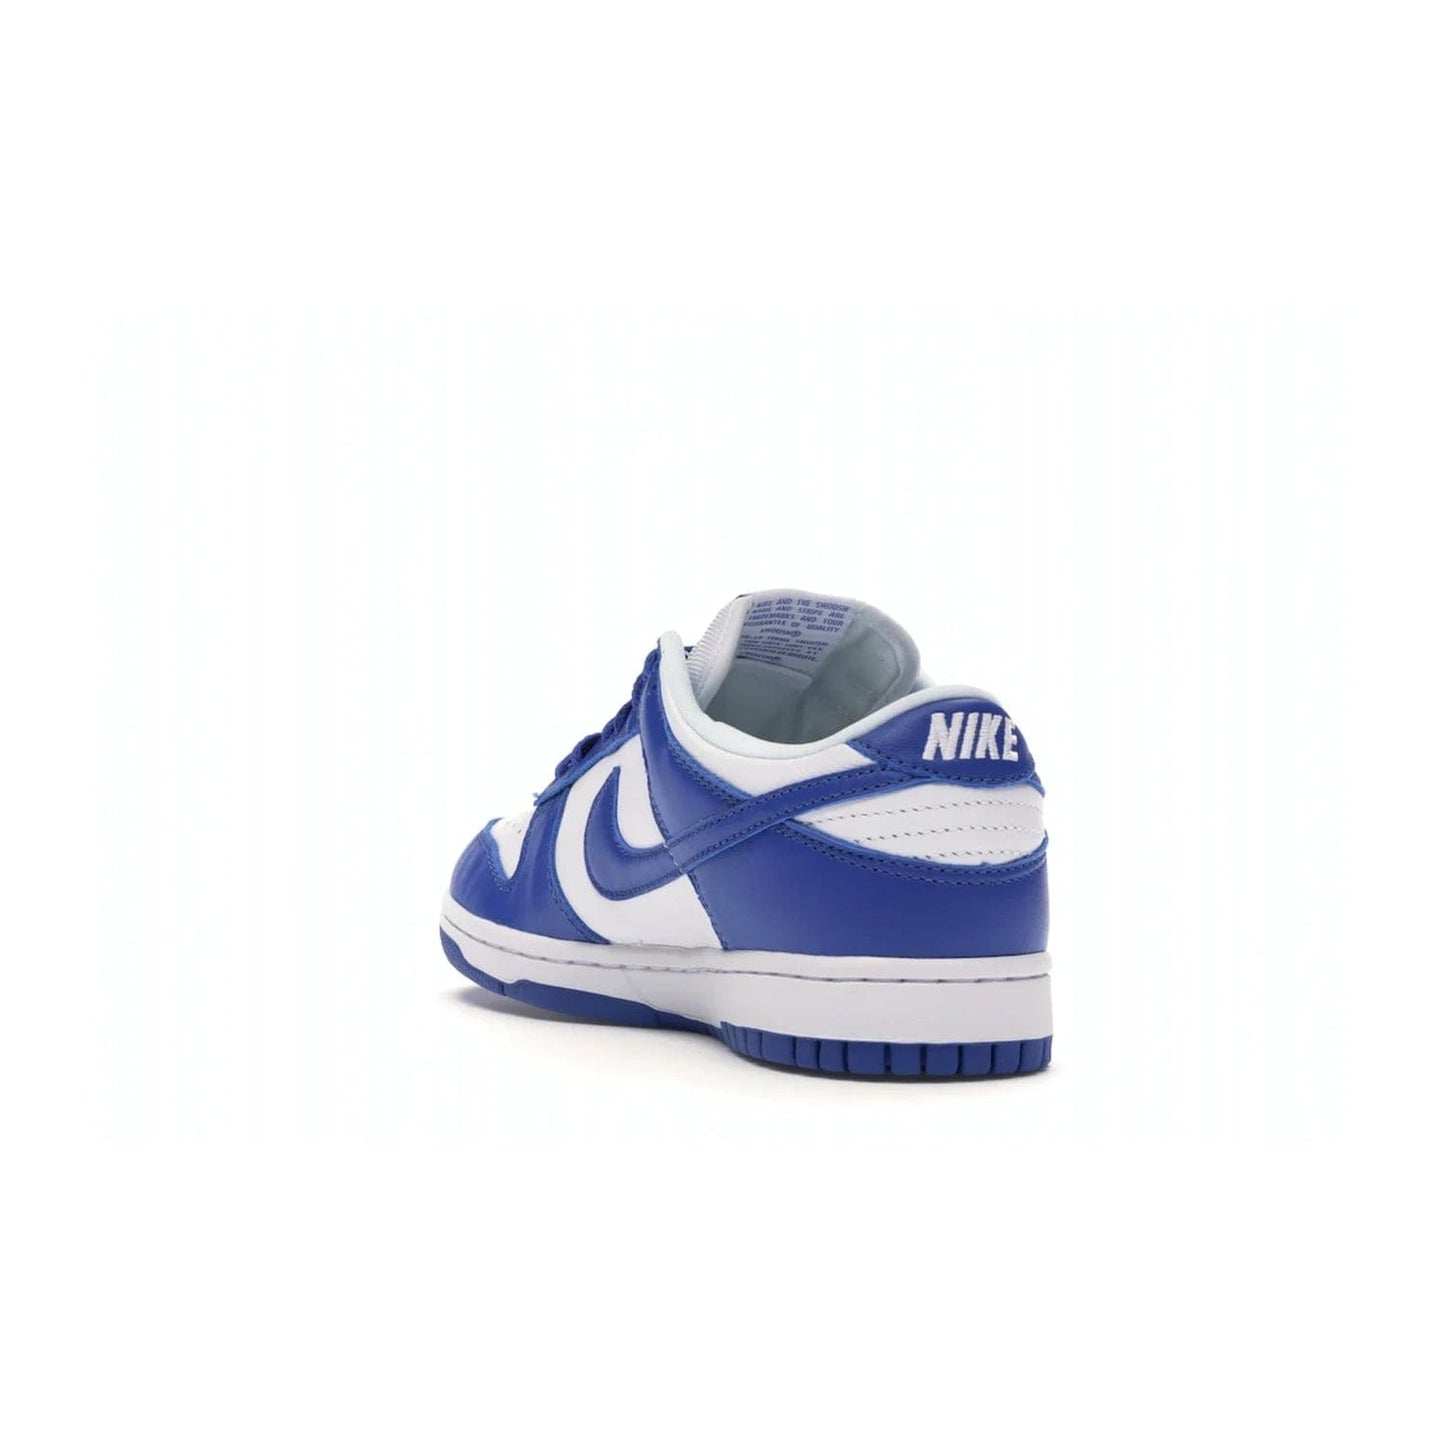 Nike Dunk Low SP Kentucky (2020/2022) - Image 25 - Only at www.BallersClubKickz.com - Classic Nike Dunk Low SP Kentucky with timeless White/Varsity Royal colorway. White leather upper, royal outsole, and Nike branding. A hit since March 2020 homage to the 1985 Nike College Colors program. Show your support with these classic kicks.